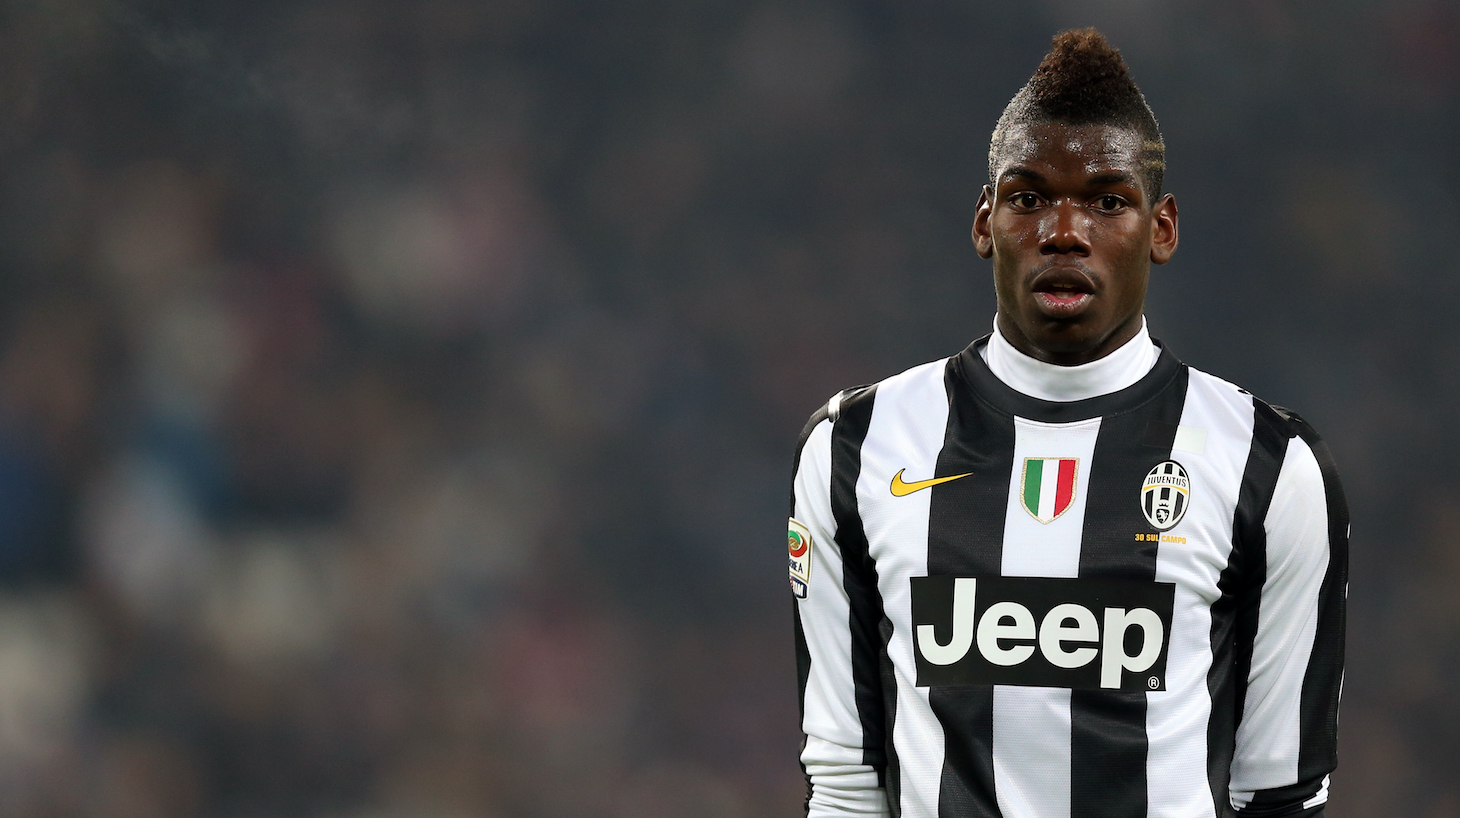 Paul Pogba of Juventus in a match against Torino on December 1, 2012.